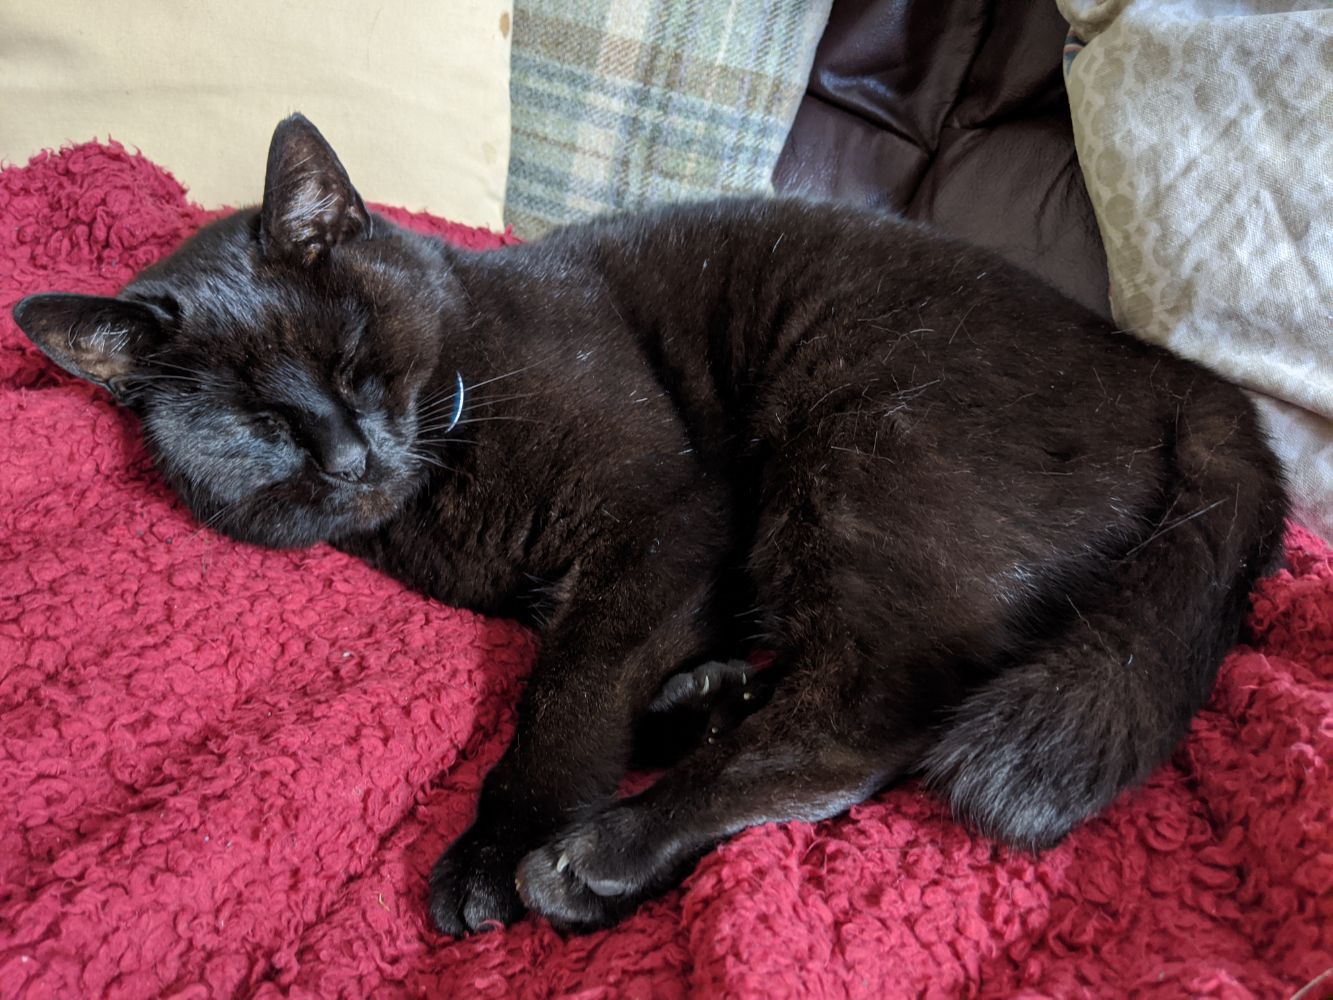 Black cat lying on red blanket, sleeping, with a muddle of paws